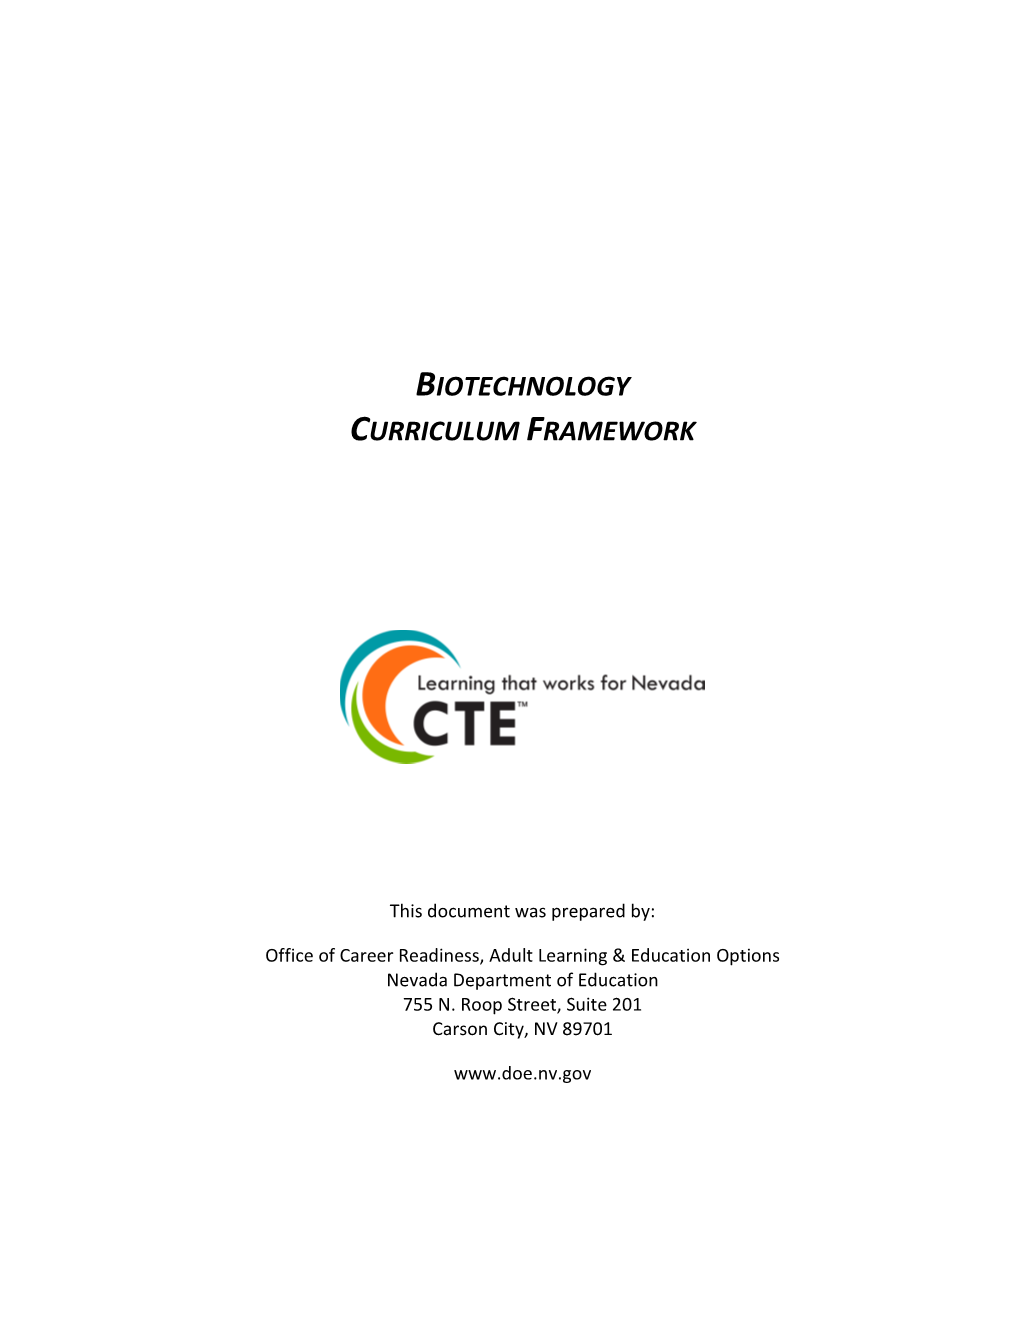 Curriculum Frameworks Are a Resource for Nevada’S Public and Charter Schools to Design, Implement, and Assess Their CTE Programs and Curriculum